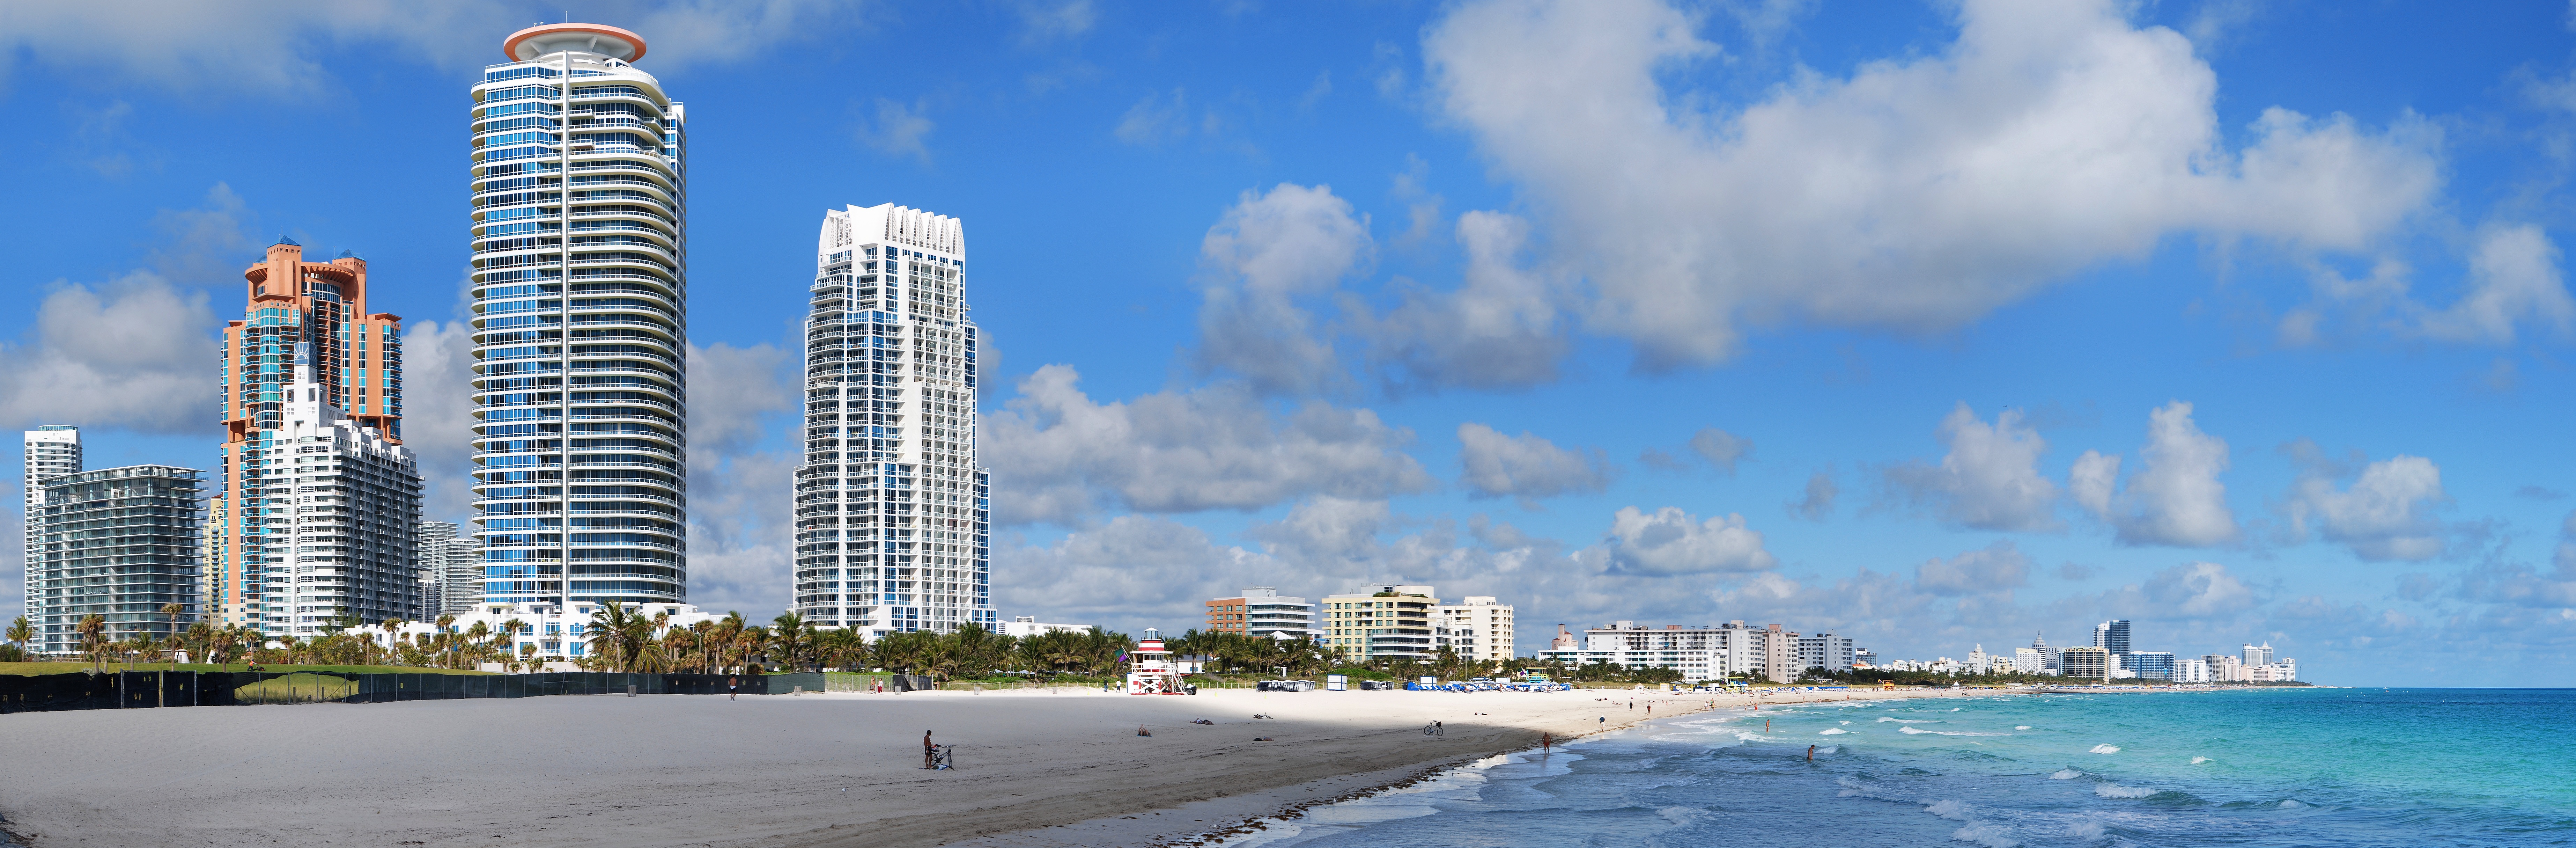 Download this South Beach Floride picture